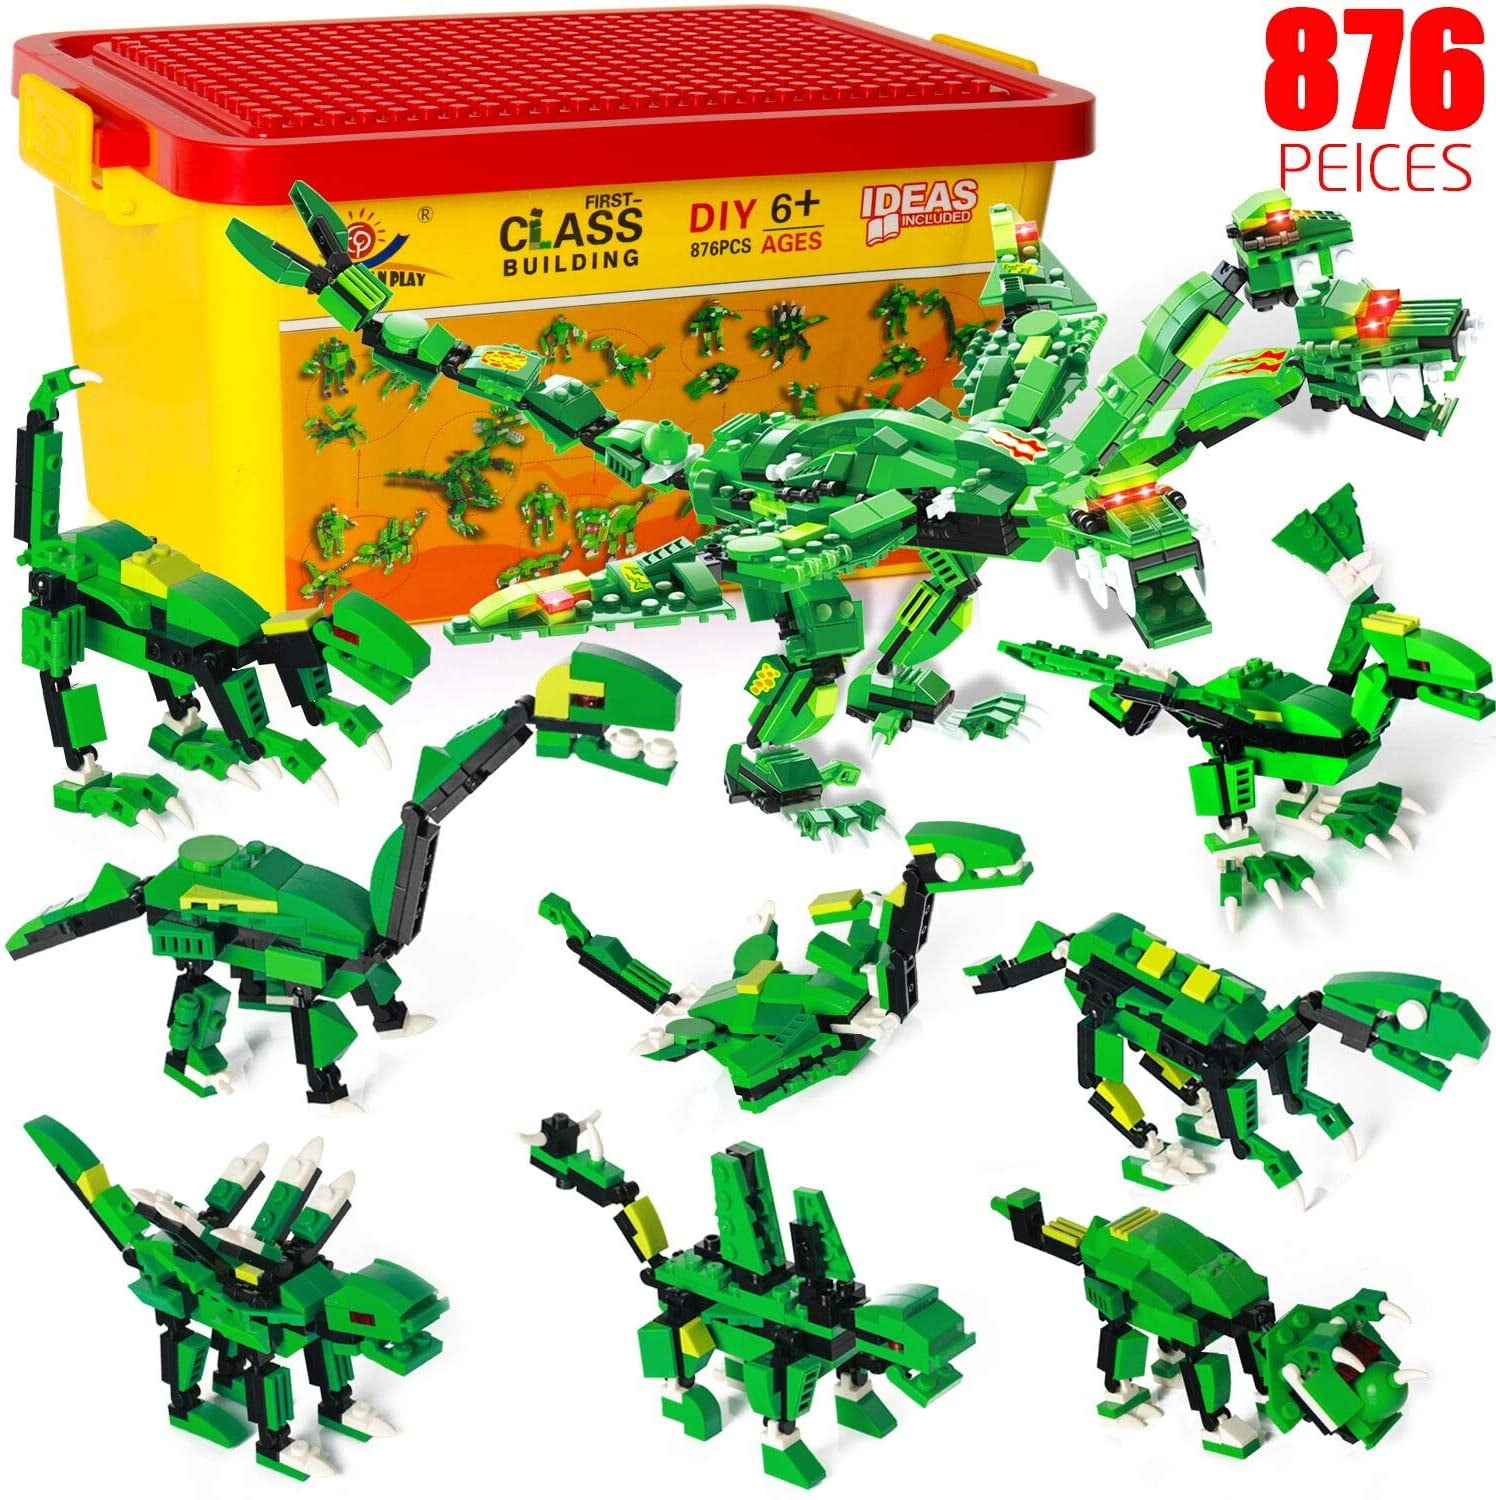 Dinosaurs Building Blocks, 876 Pcs 8 in 1, Exercise N Play STEM Creative  DIY Construction Toy for Boys Girls with Storage Bucket